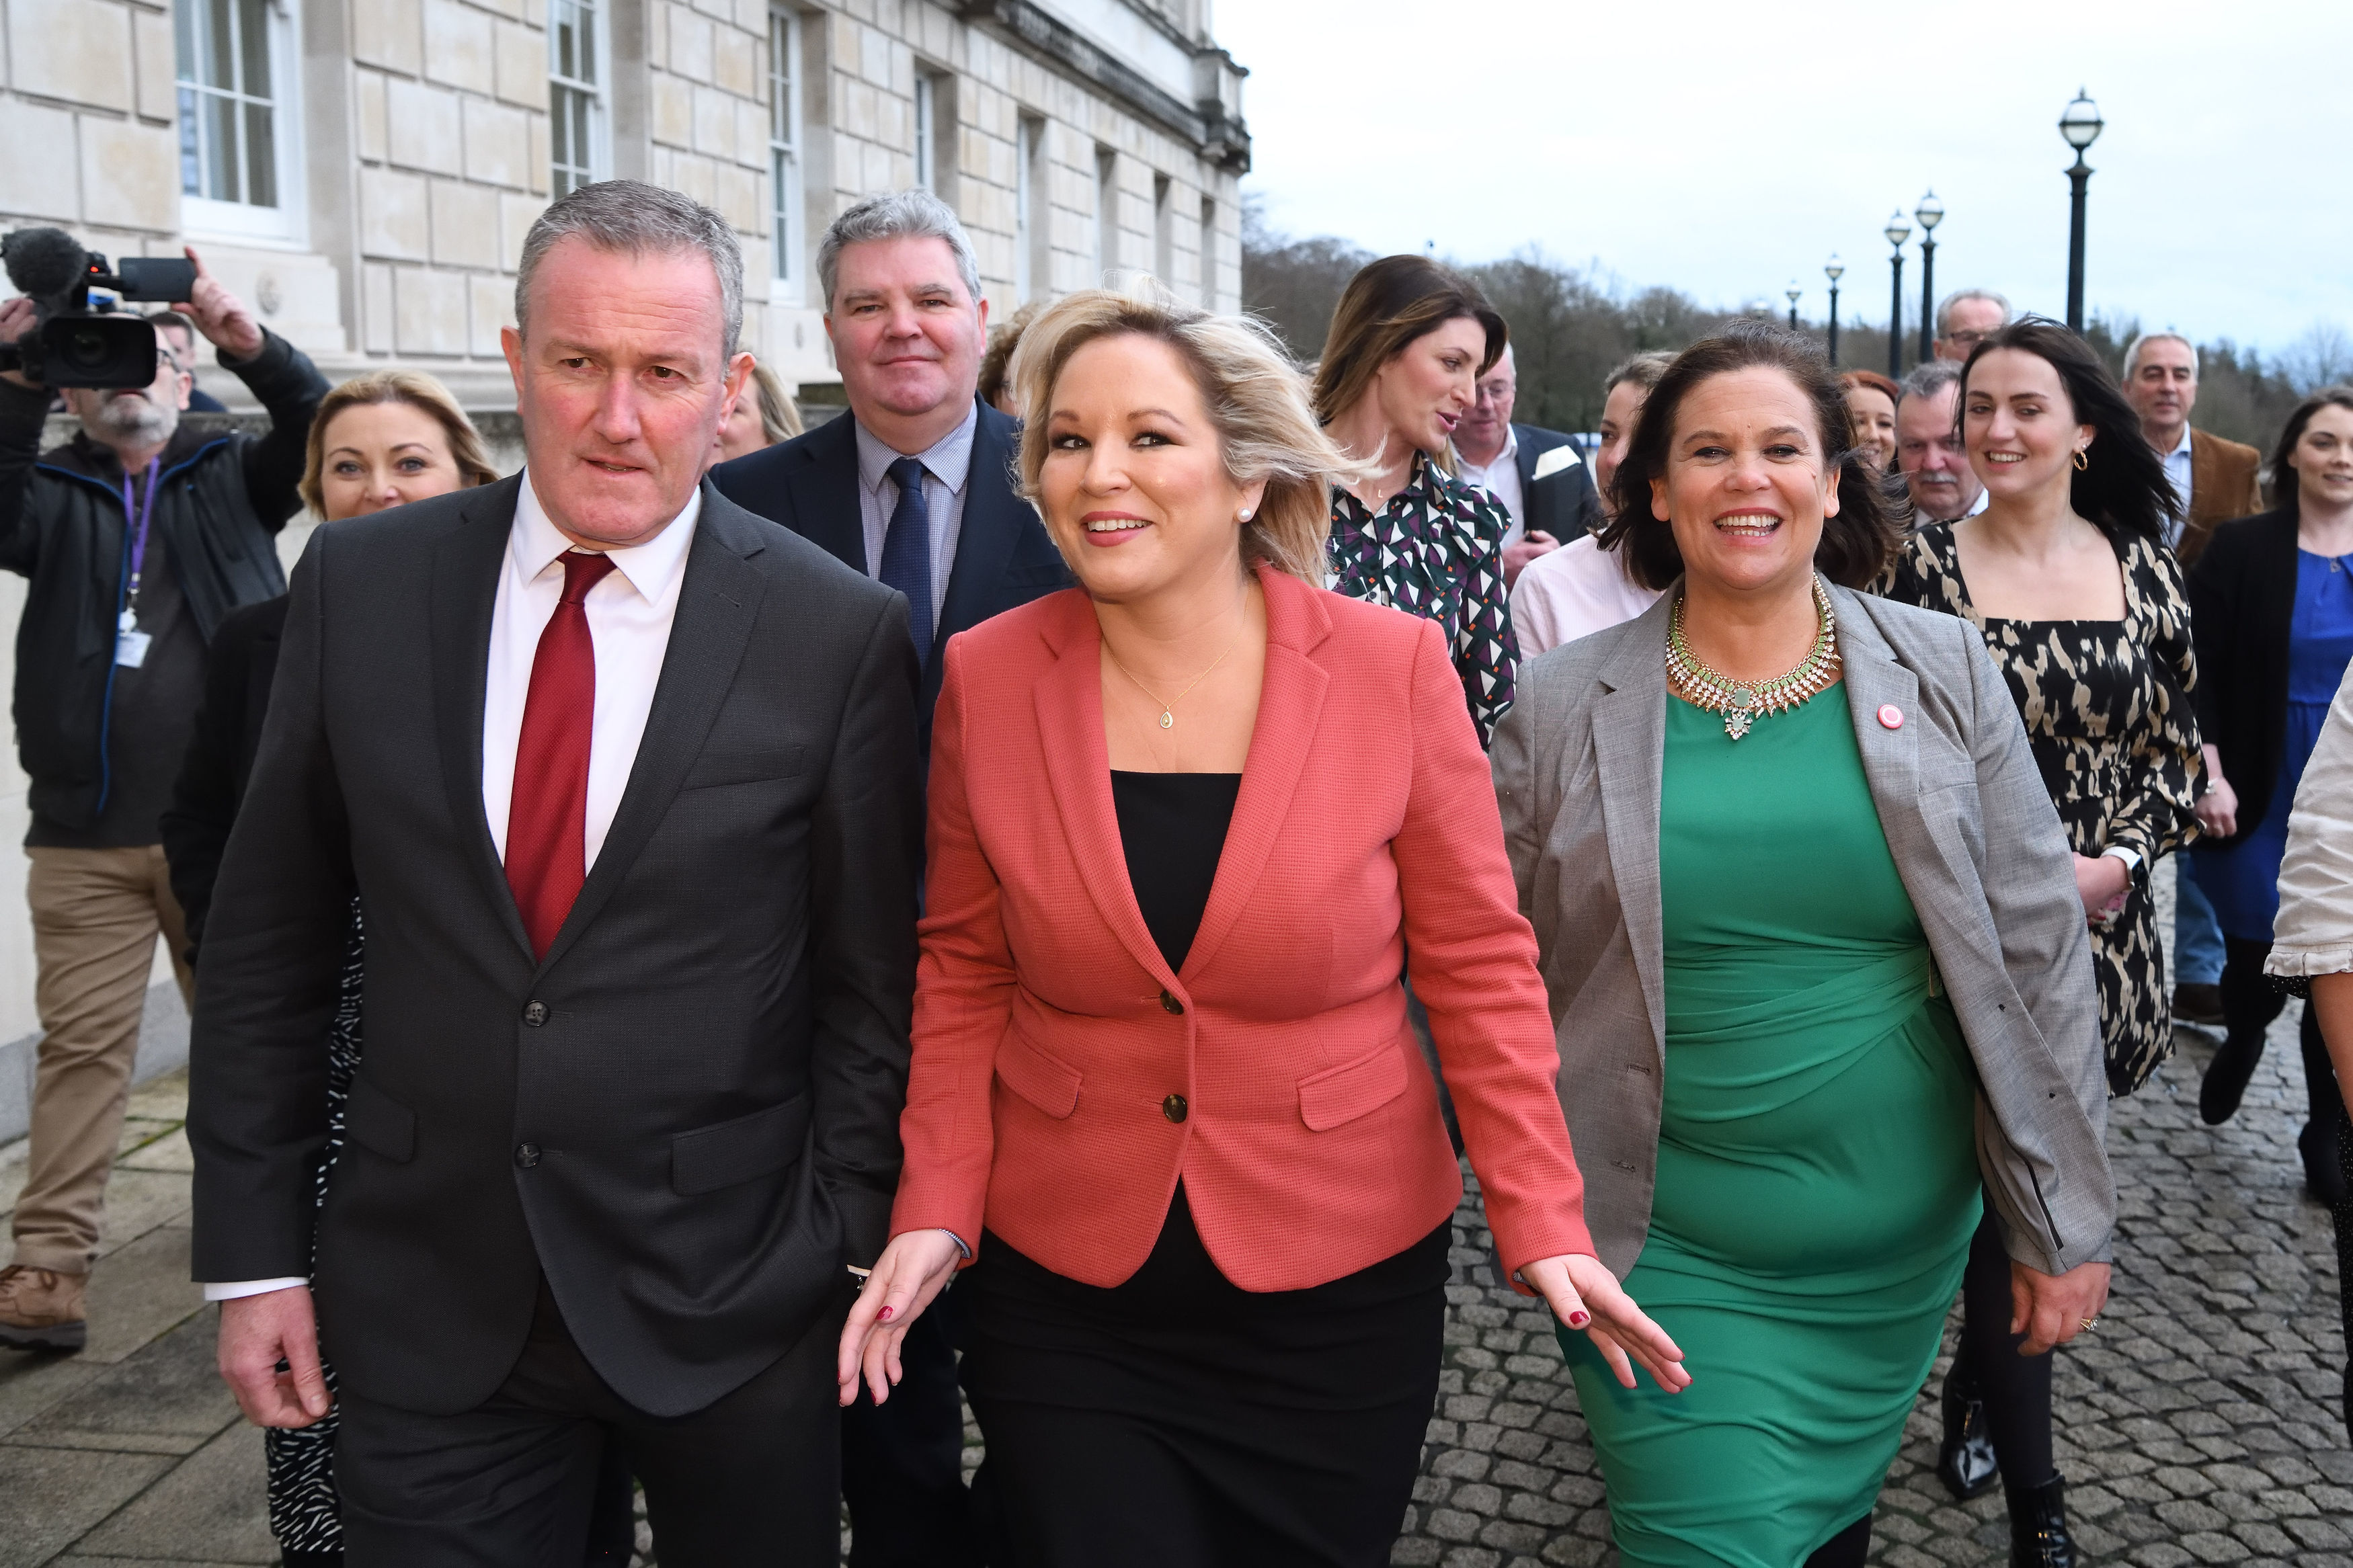 Northern Ireland’s new Deputy First Minister Michelle O’Neill, centre, arrives at Stormont with Conor Murphy and Mary Lou McDonald